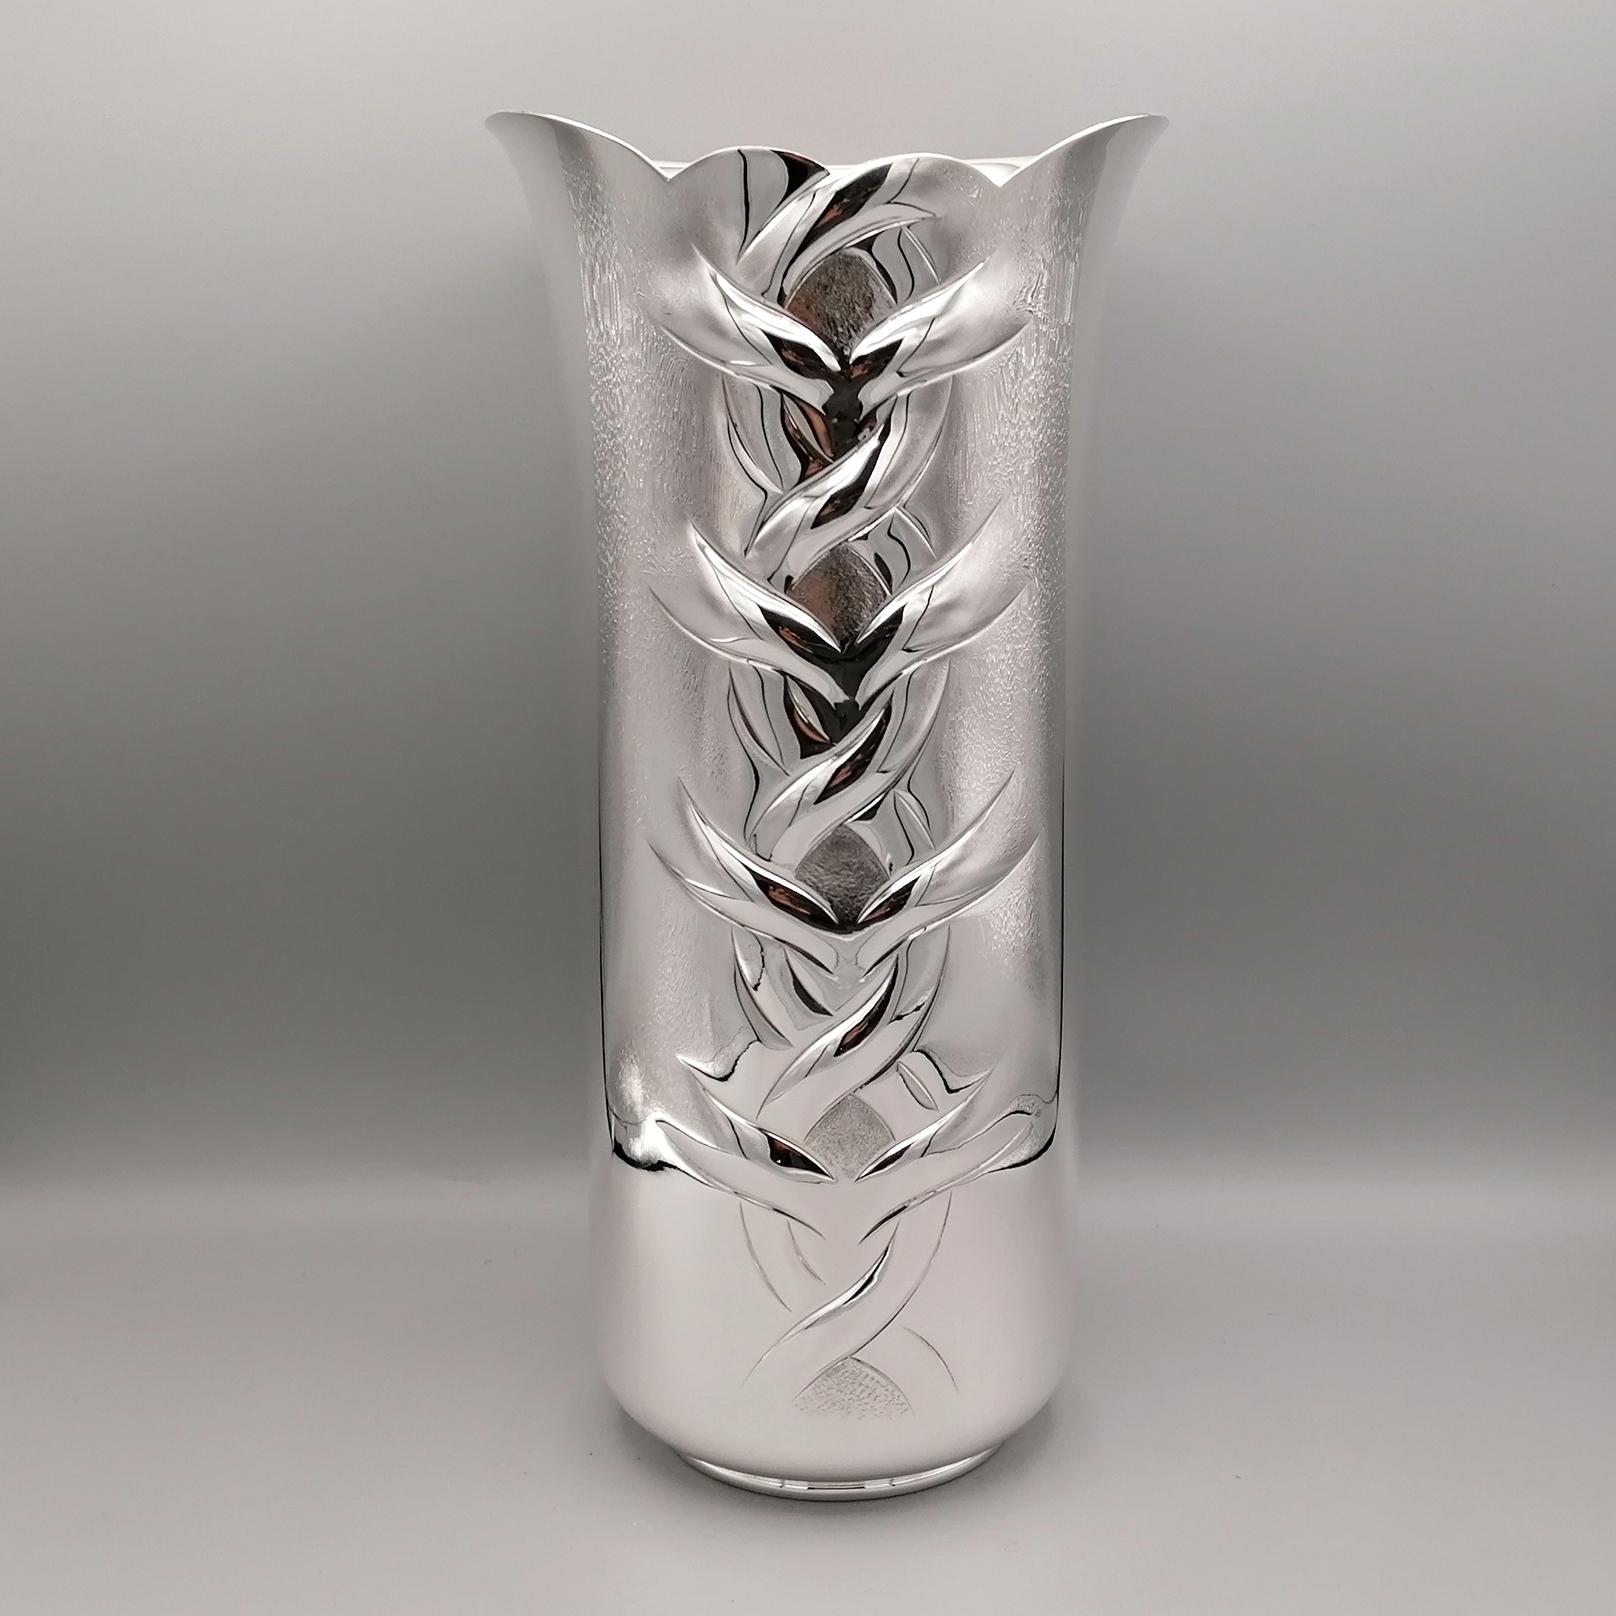 Fully handmade sterling silver vase.
The structure of the body is cylindrical and widens slightly in the upper part, called the mouth of the vase.
The vase is smooth and shiny and is characterized by a central overhang and chisel that defines it